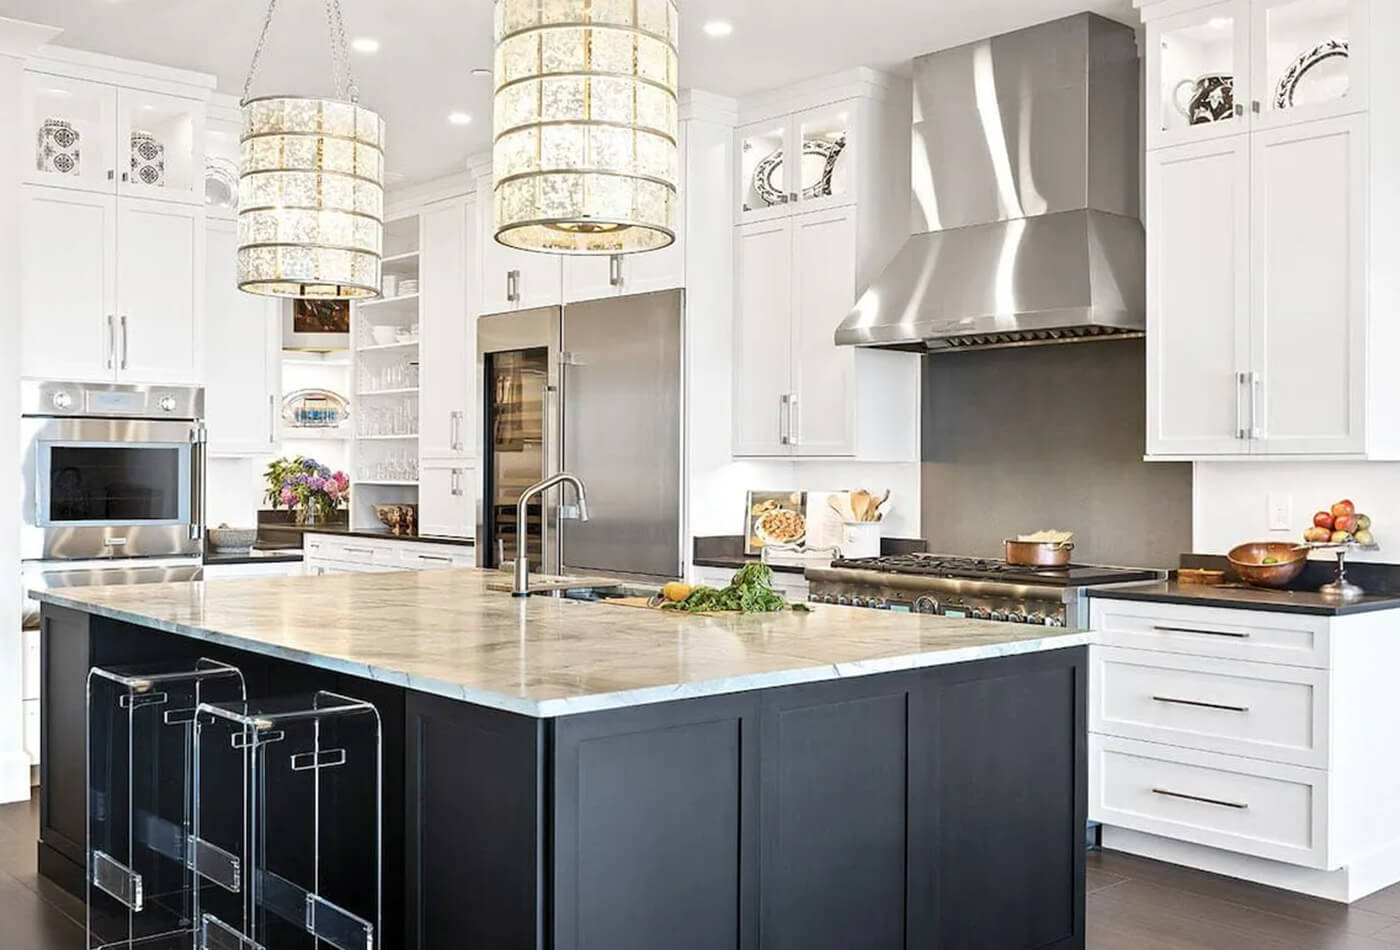 Is Choosing Budget-Friendly Stone Slabs the Ideal Countertop Material?